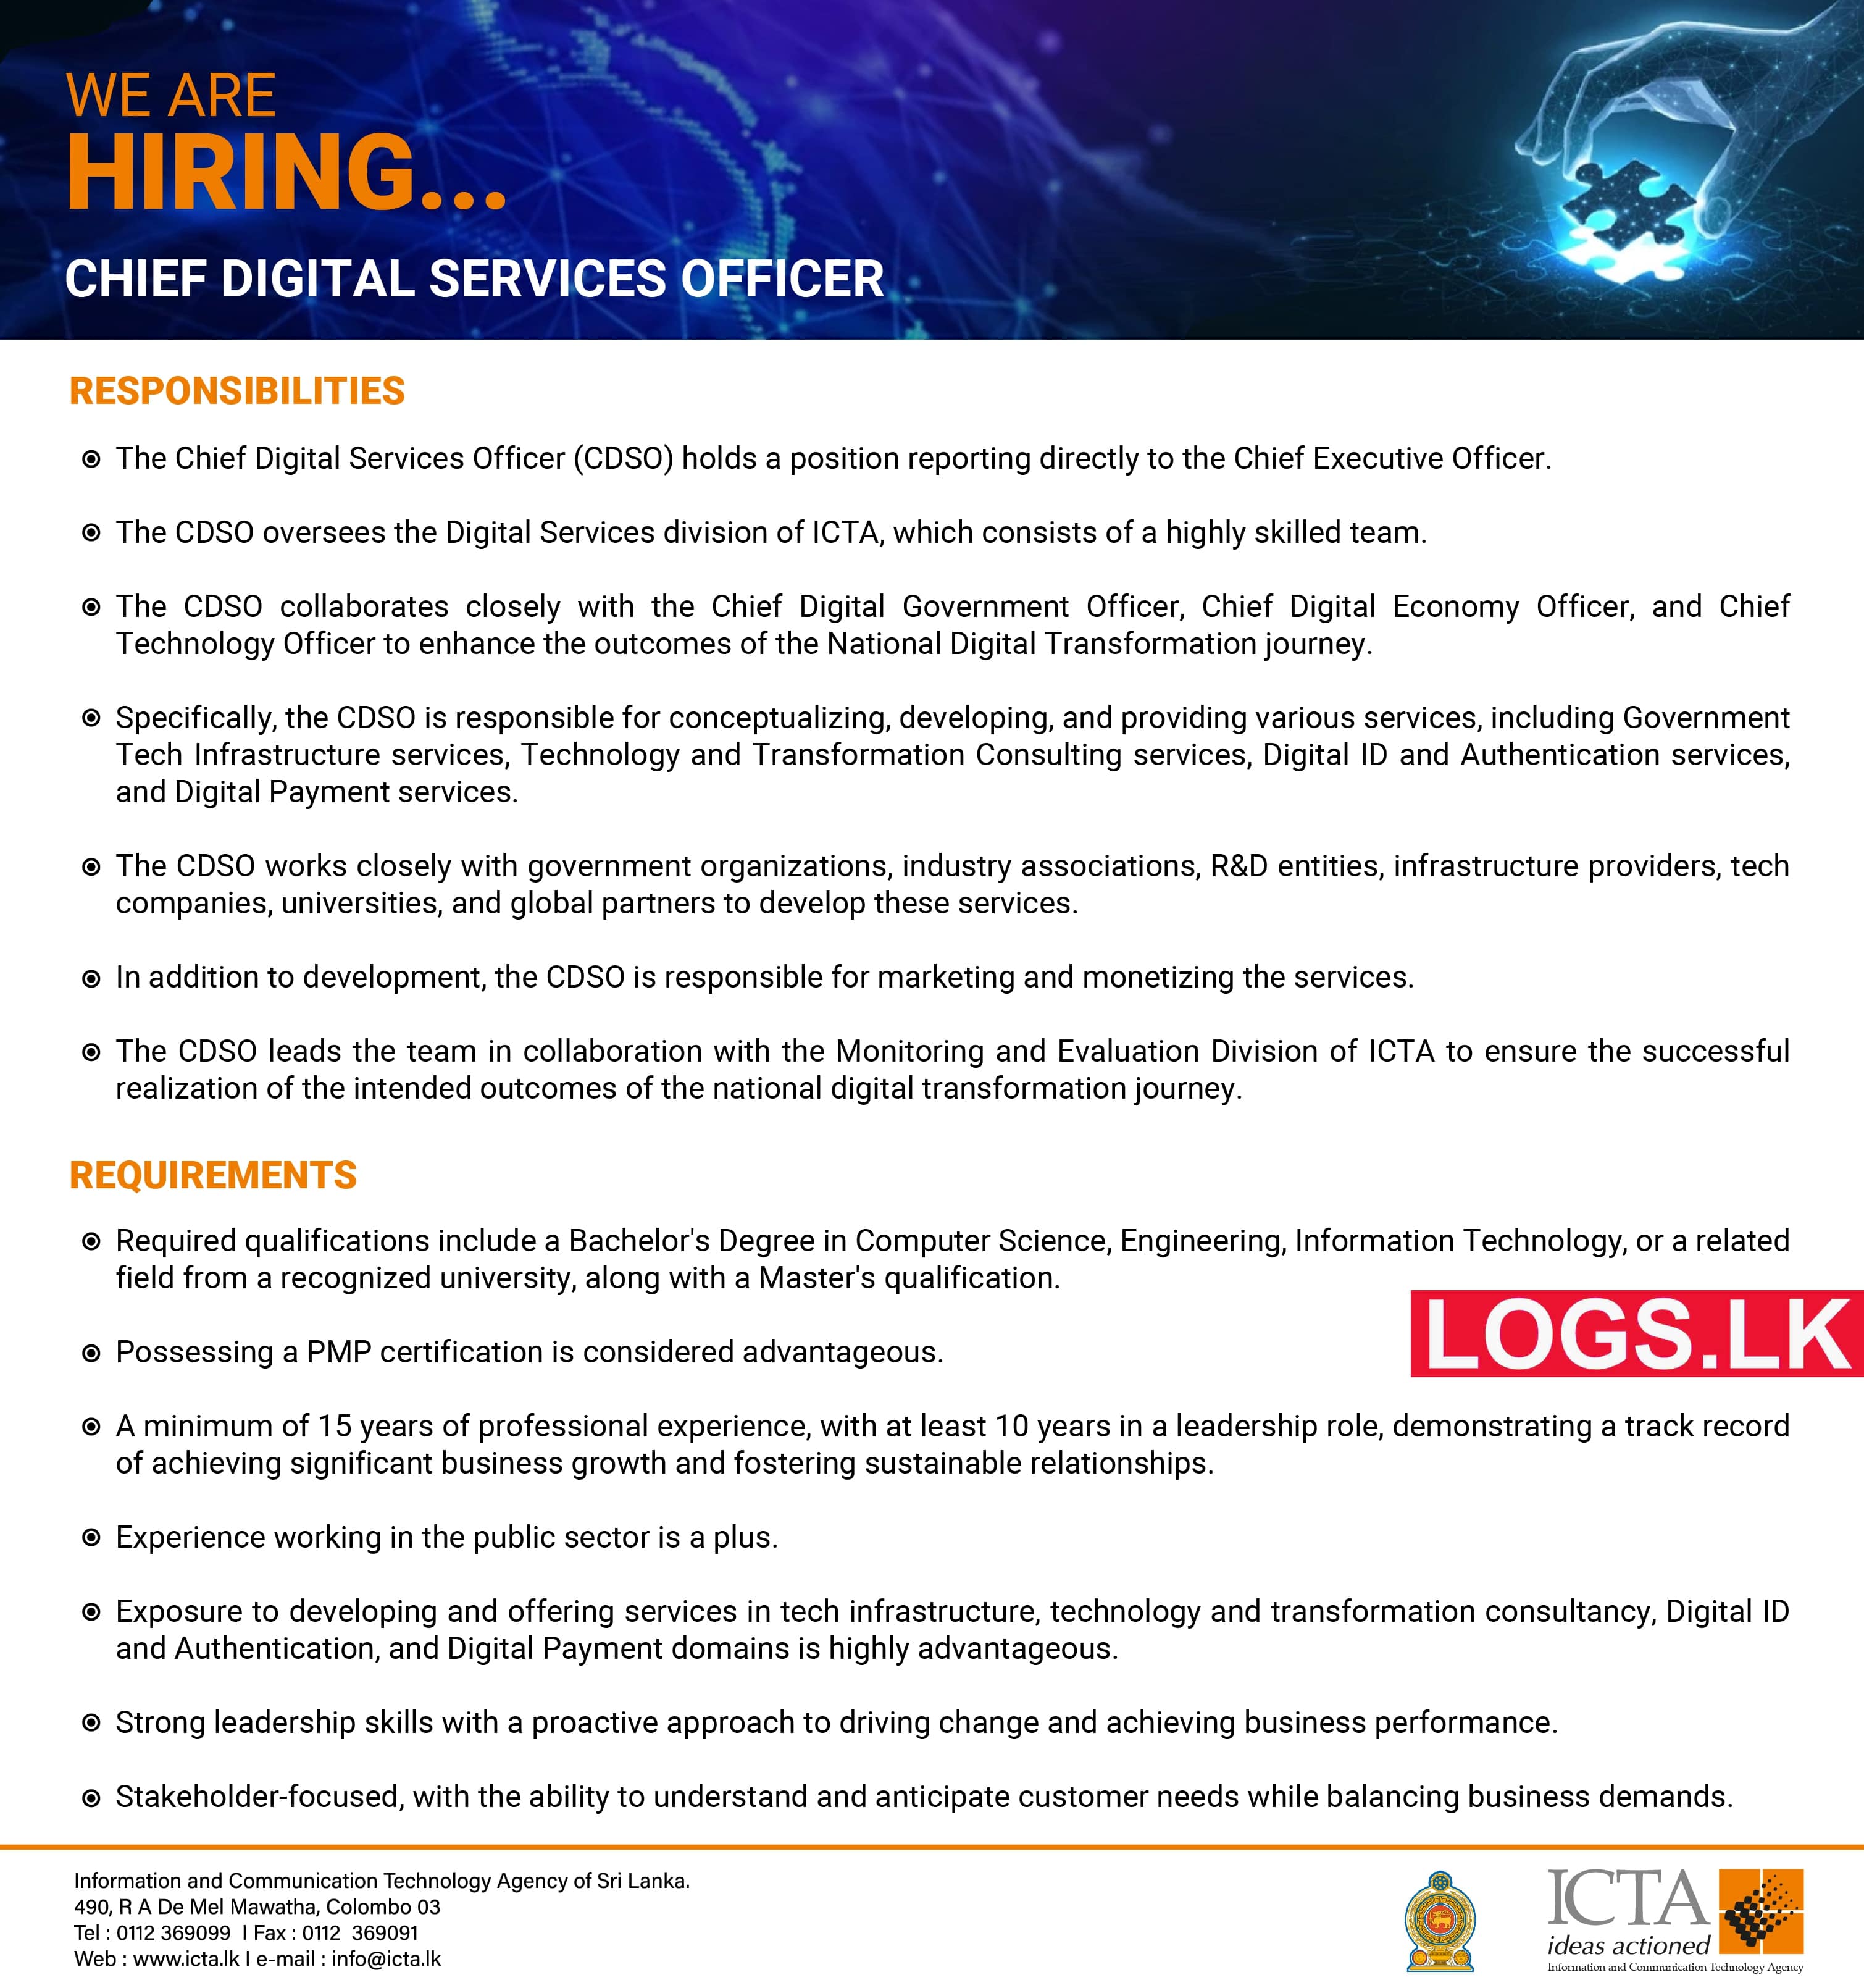 Chief Digital Services Officer - ICT Agency of Sri Lanka Vacancies 2023 Application Form. Apply Online